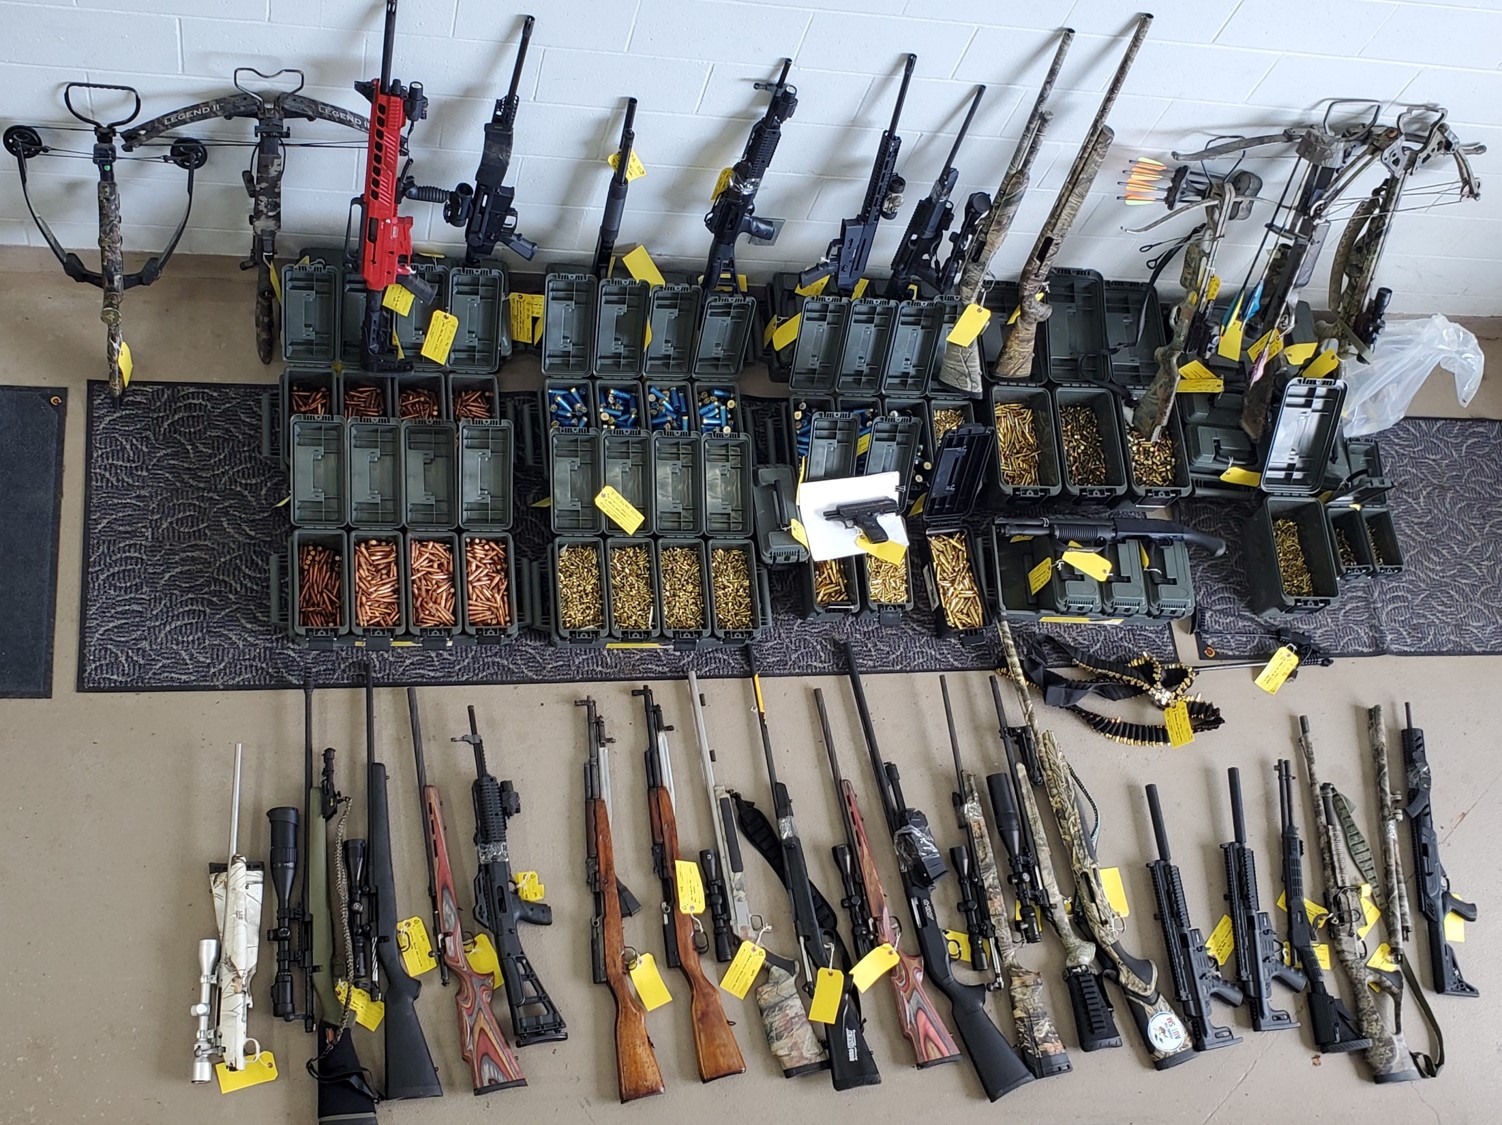 OPP seize 29 long guns from South Stormont home